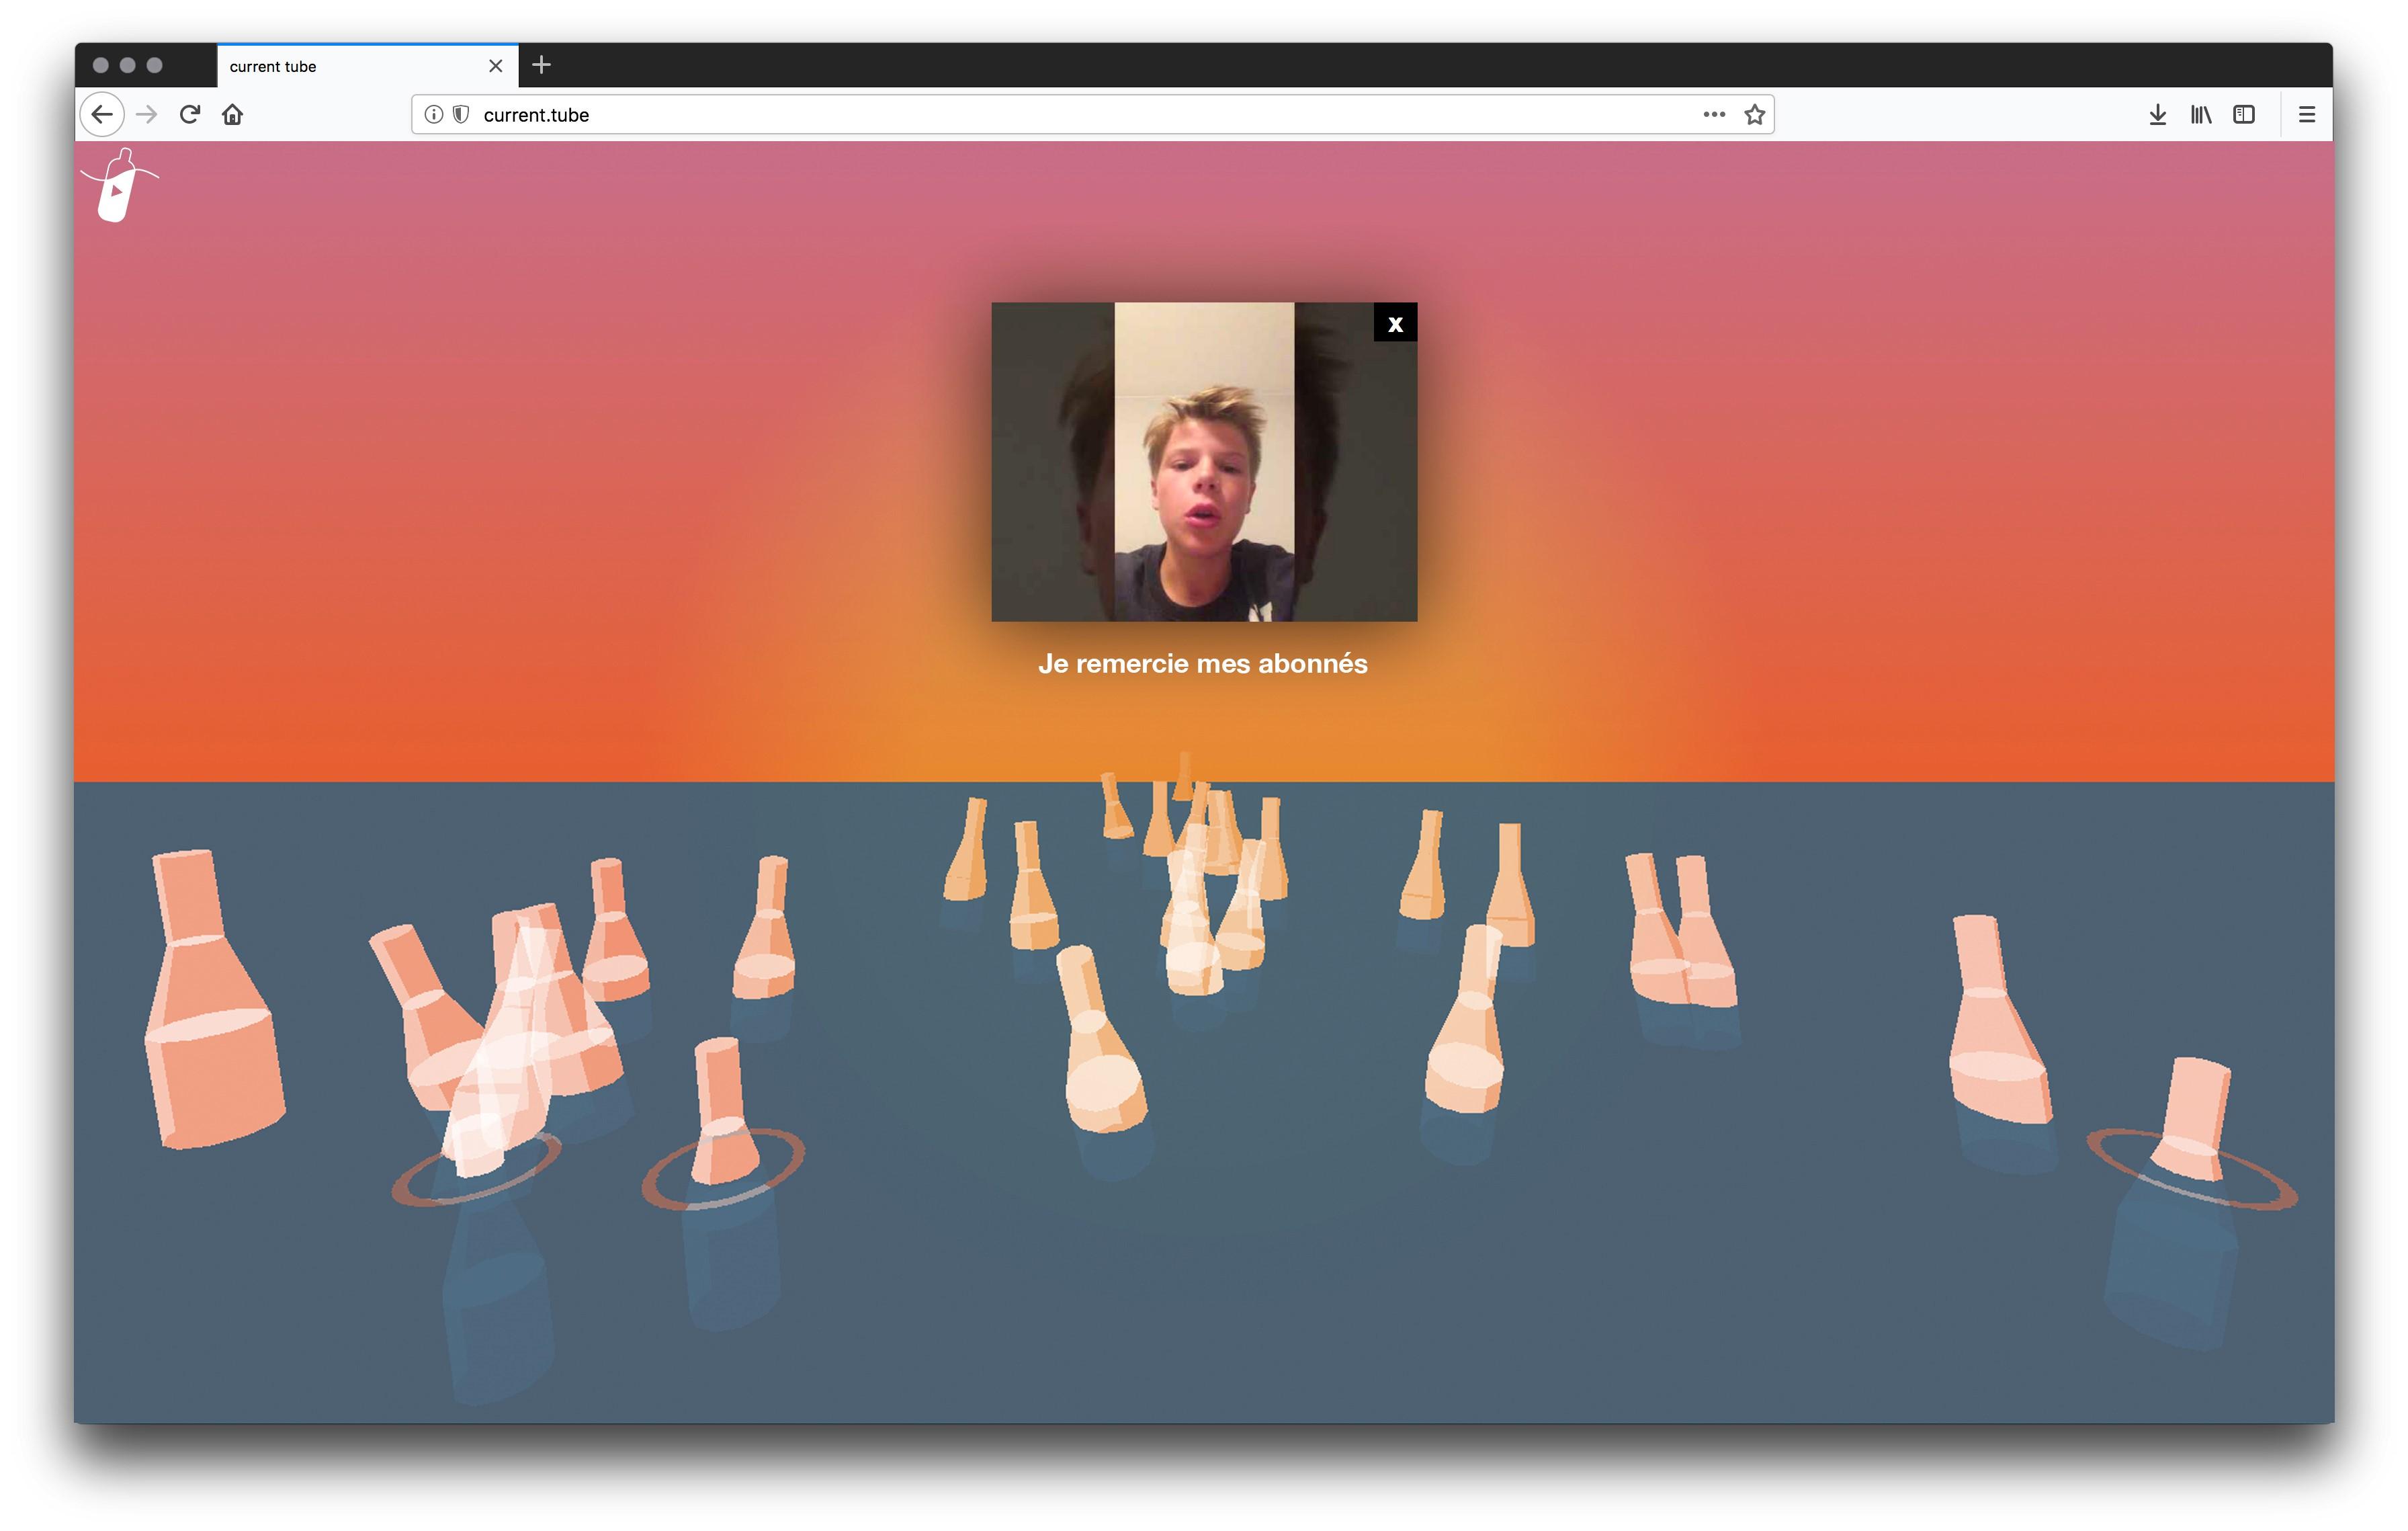 A browser open to a chat with a young man over a background of computer-rendered wine bottles in gray-colored water under a gradient orange sky.